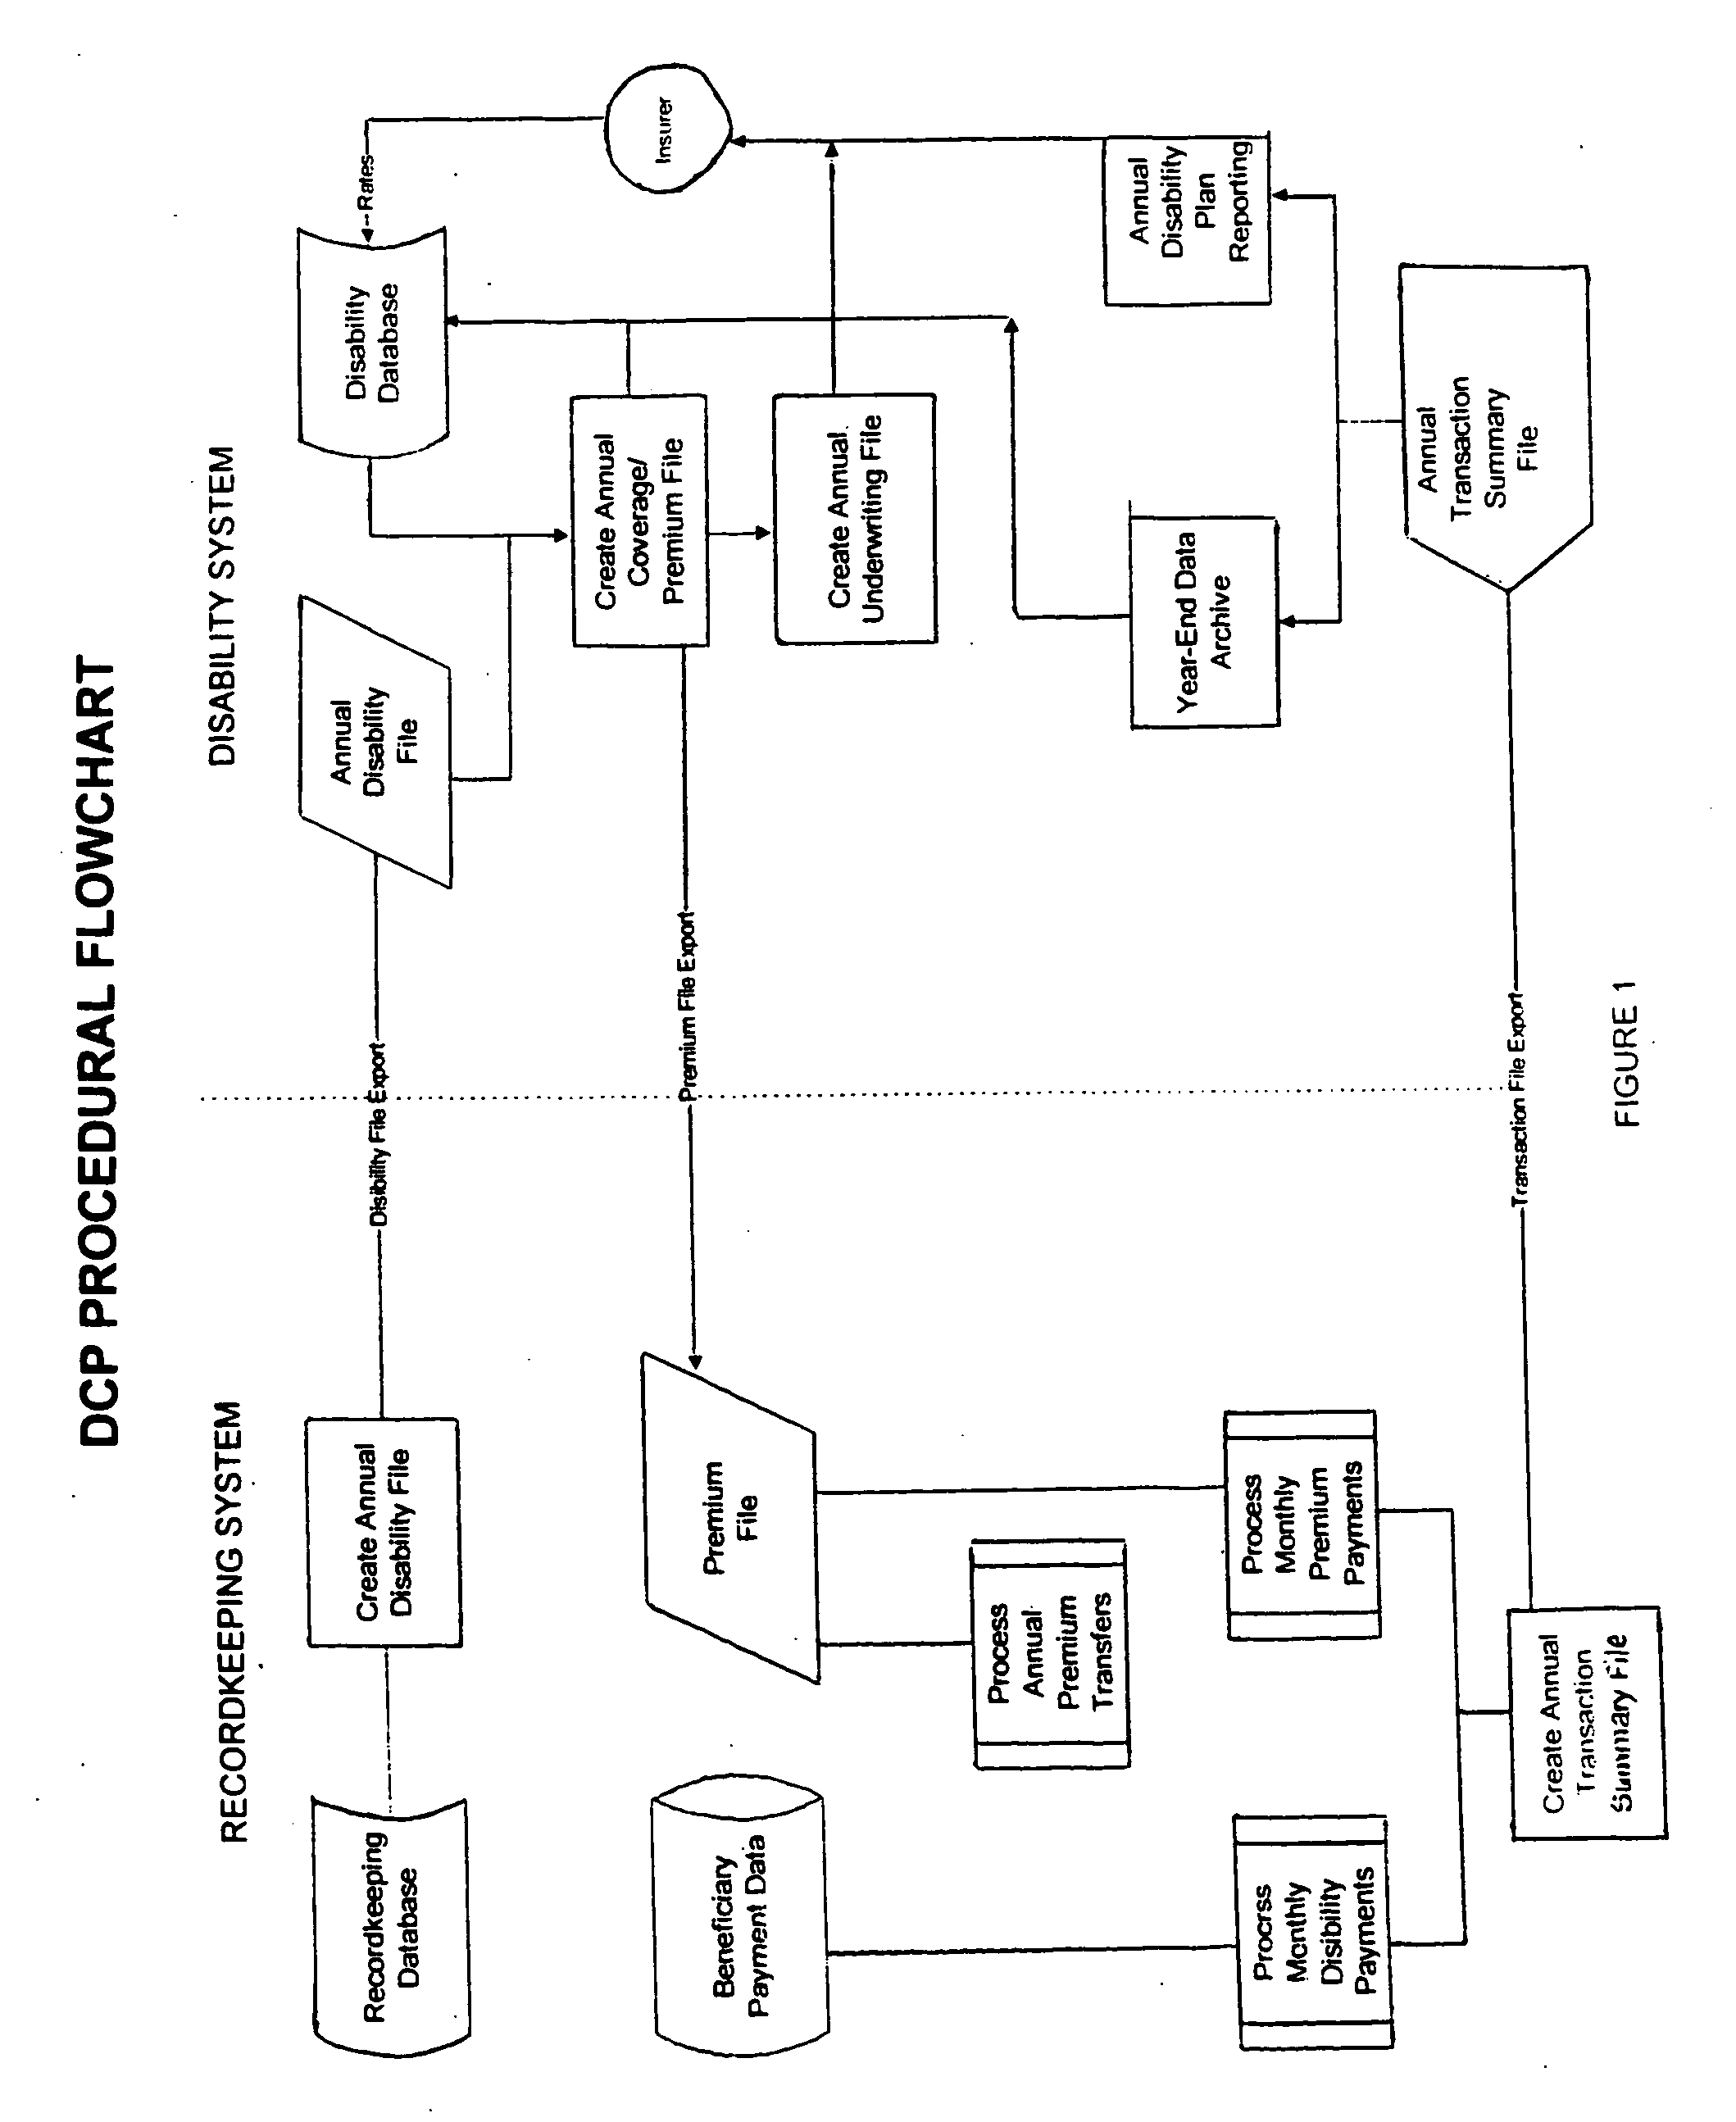 Method and system for providing insurance protection against loss of retirement accumulations in a tax favored defined contribution plan in the event of a participant's disability